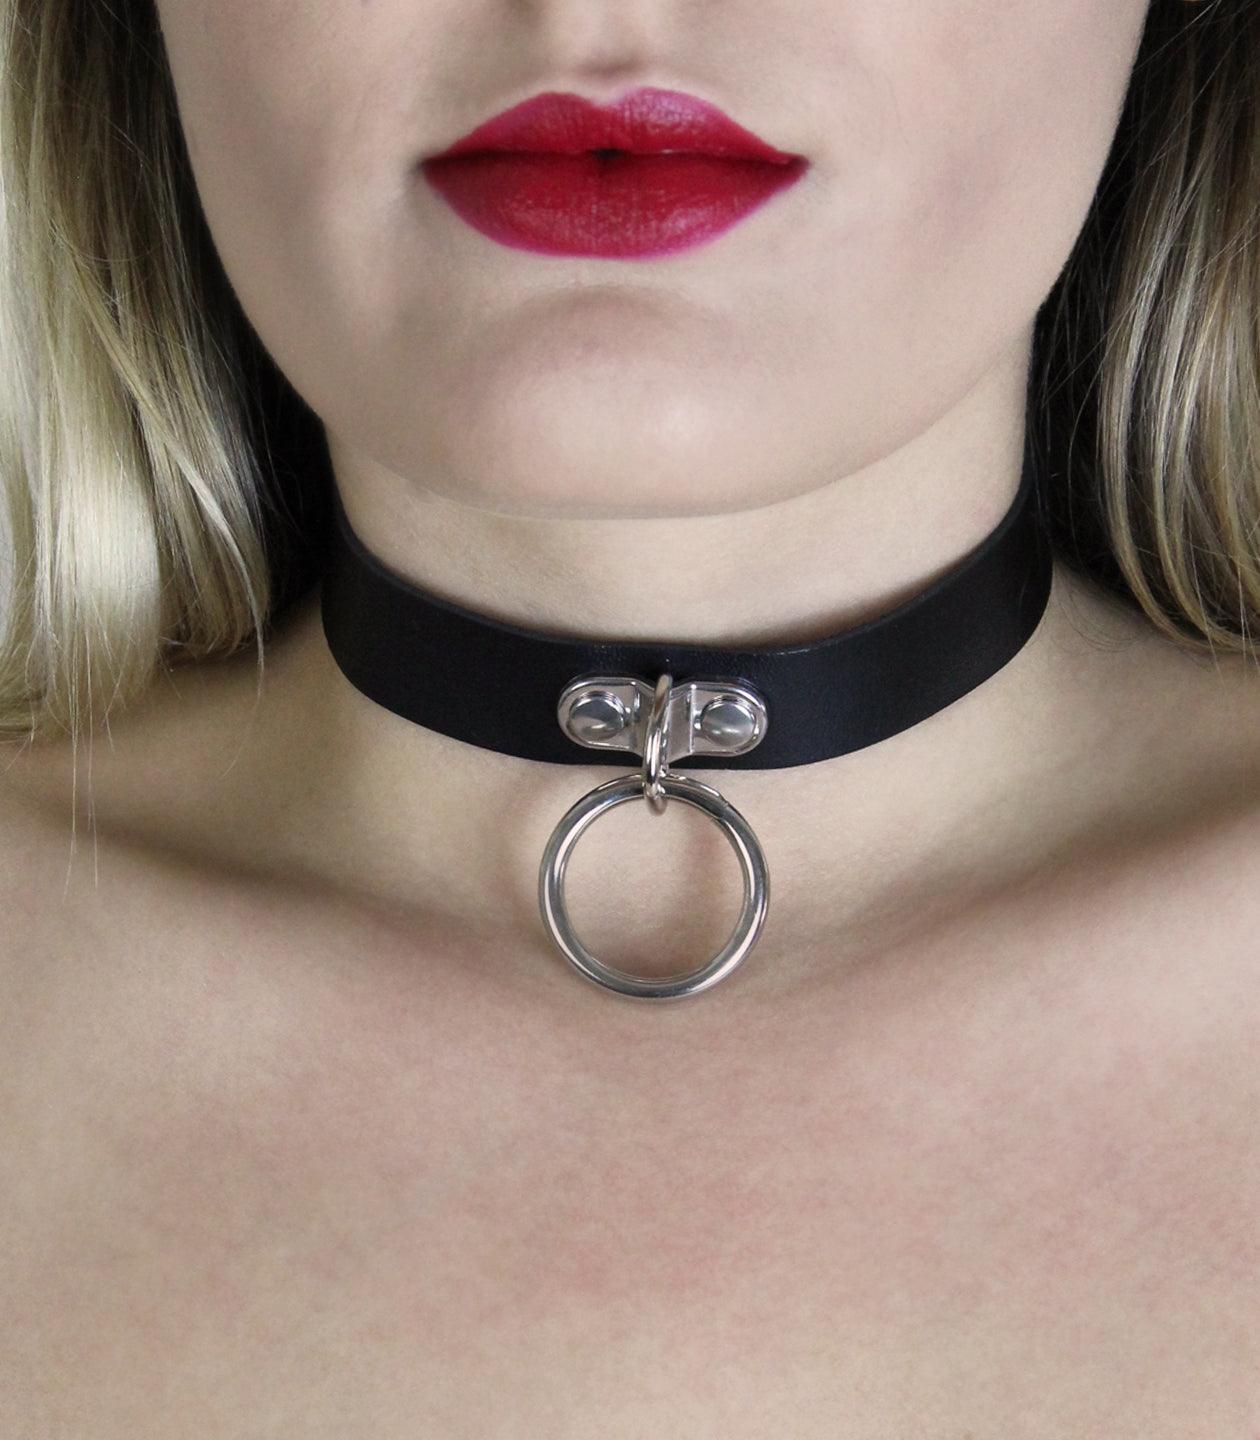 Vegan Collar with Single Ring - Passionfruit